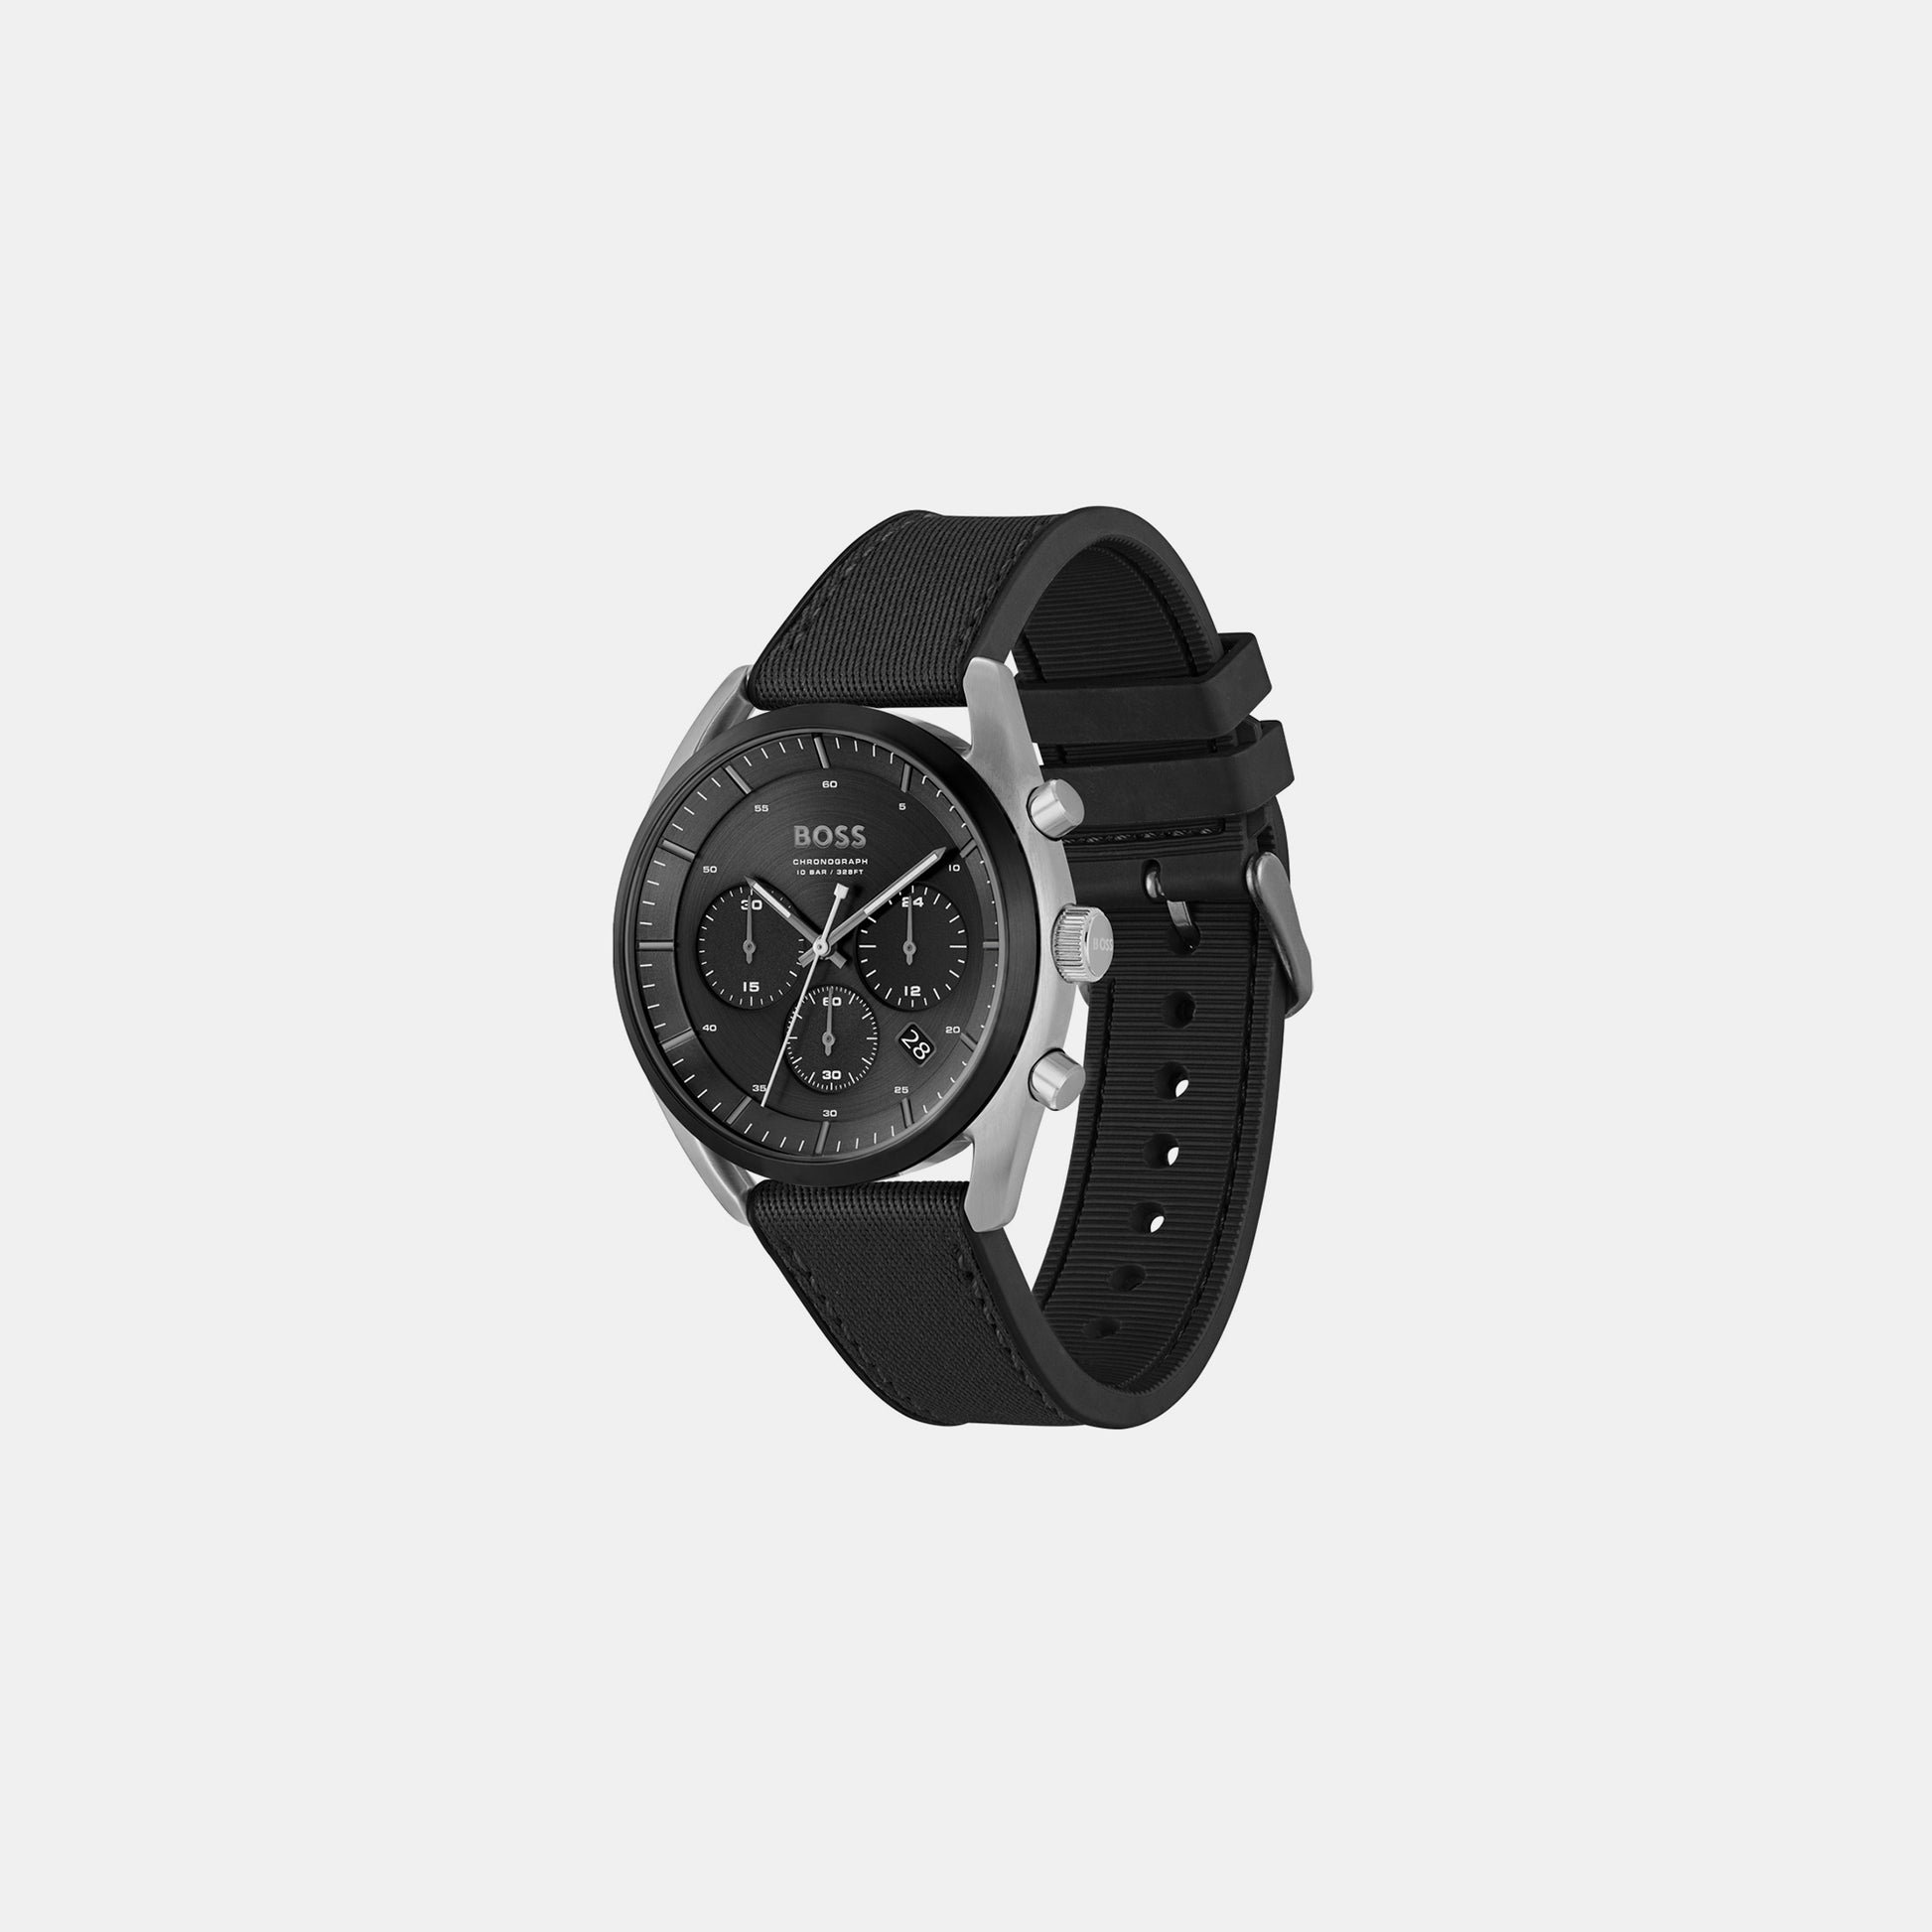 Top Male Black Chronograph Silicon Watch 1514091 – Just In Time